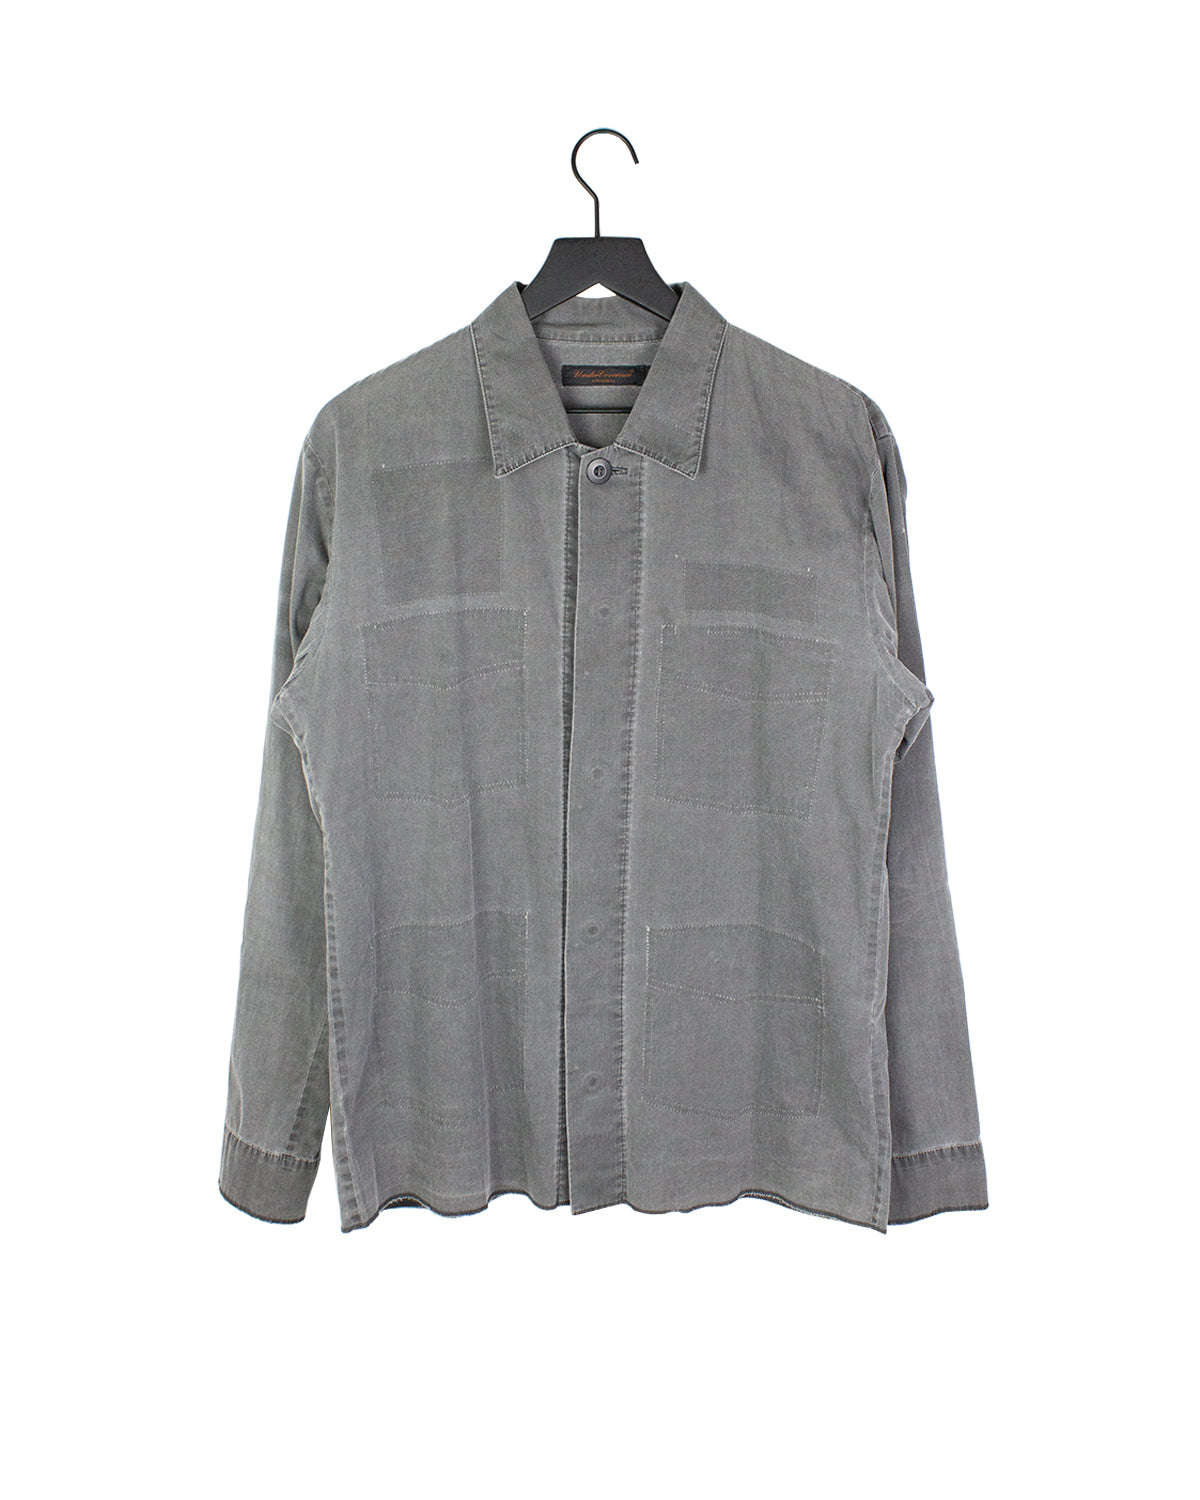 Undercover Long Sleeve Button Up